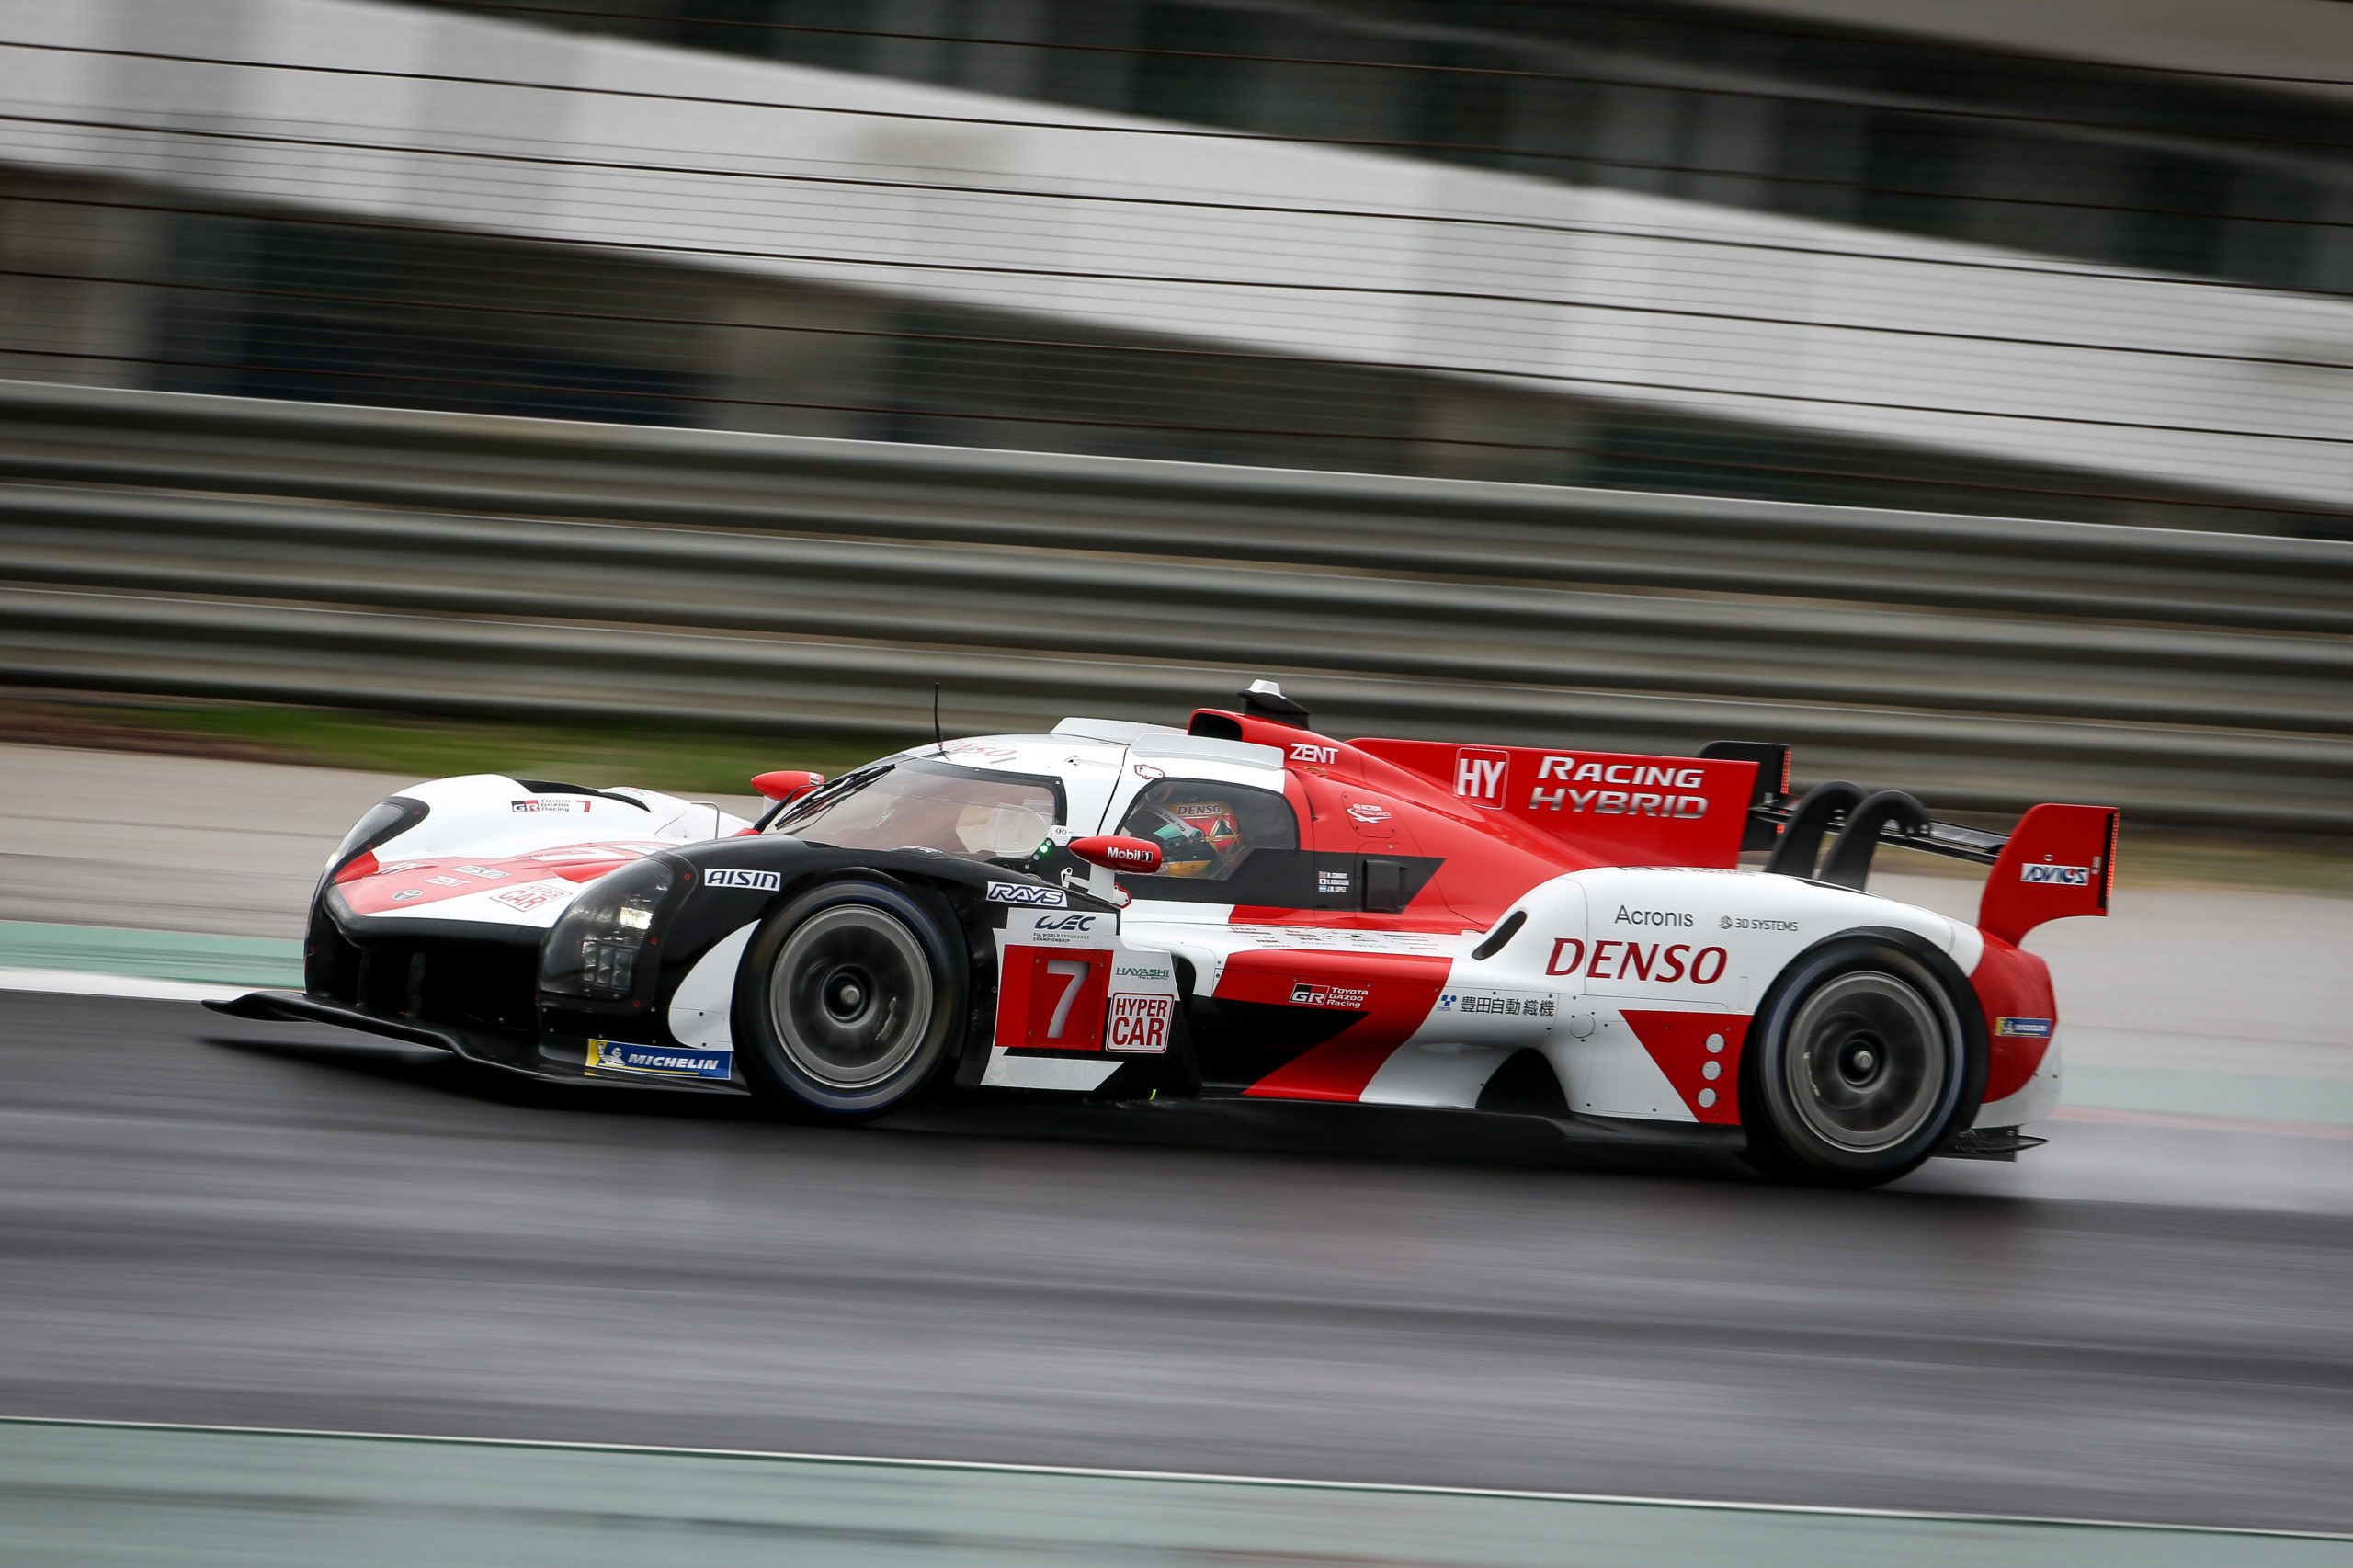 Are hybrids still the future for endurance racing?